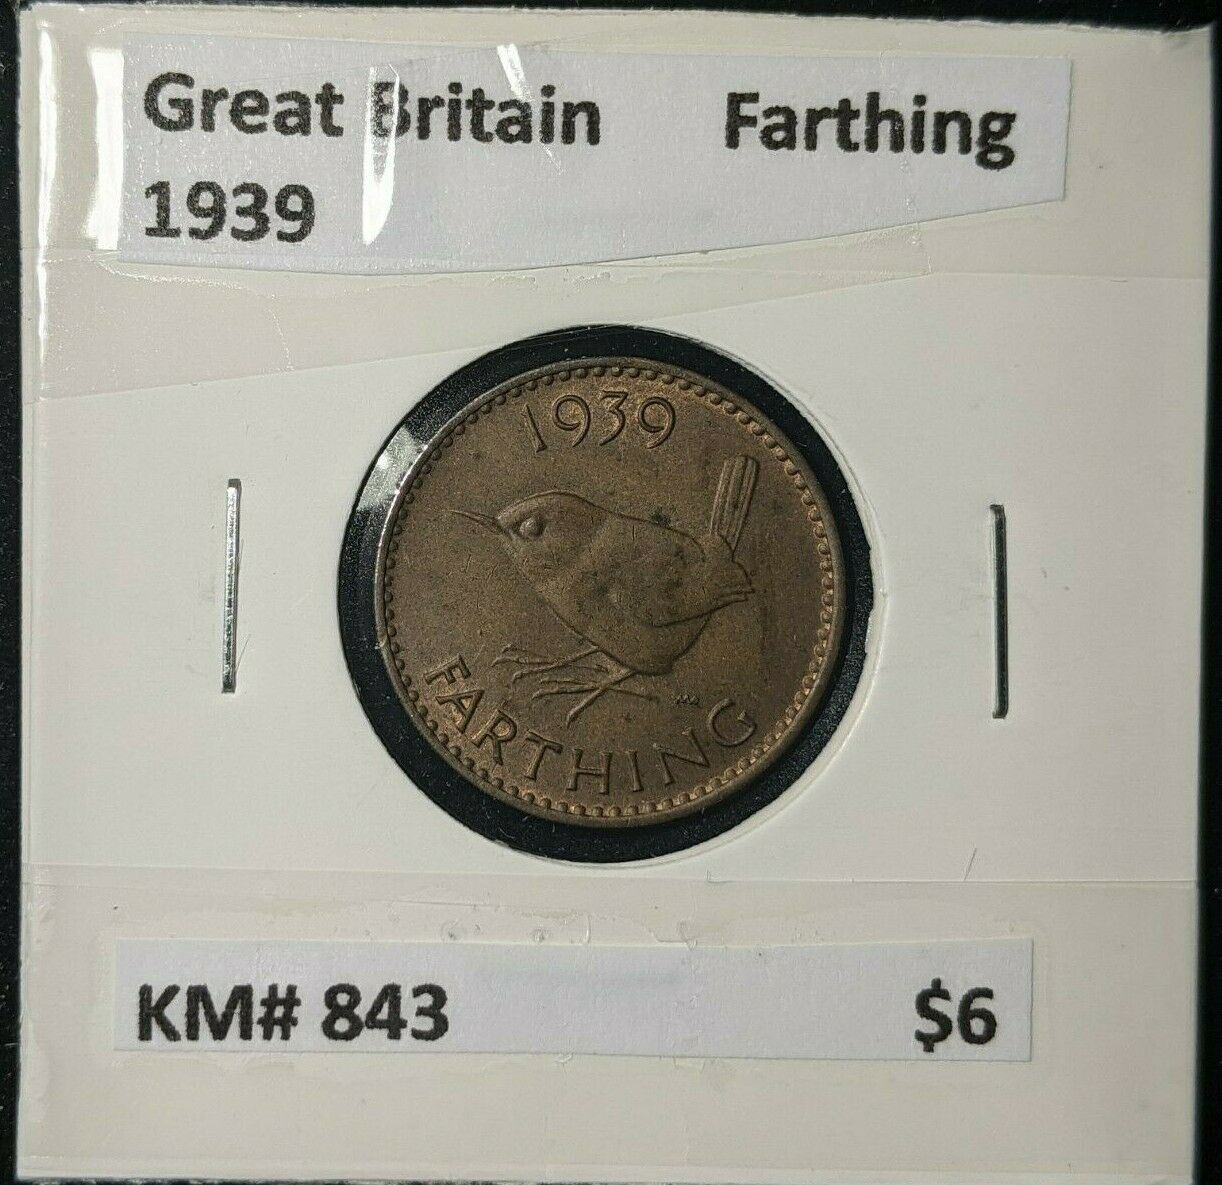 Great Britain 1939 1/4d Farthing KM# 843 #134